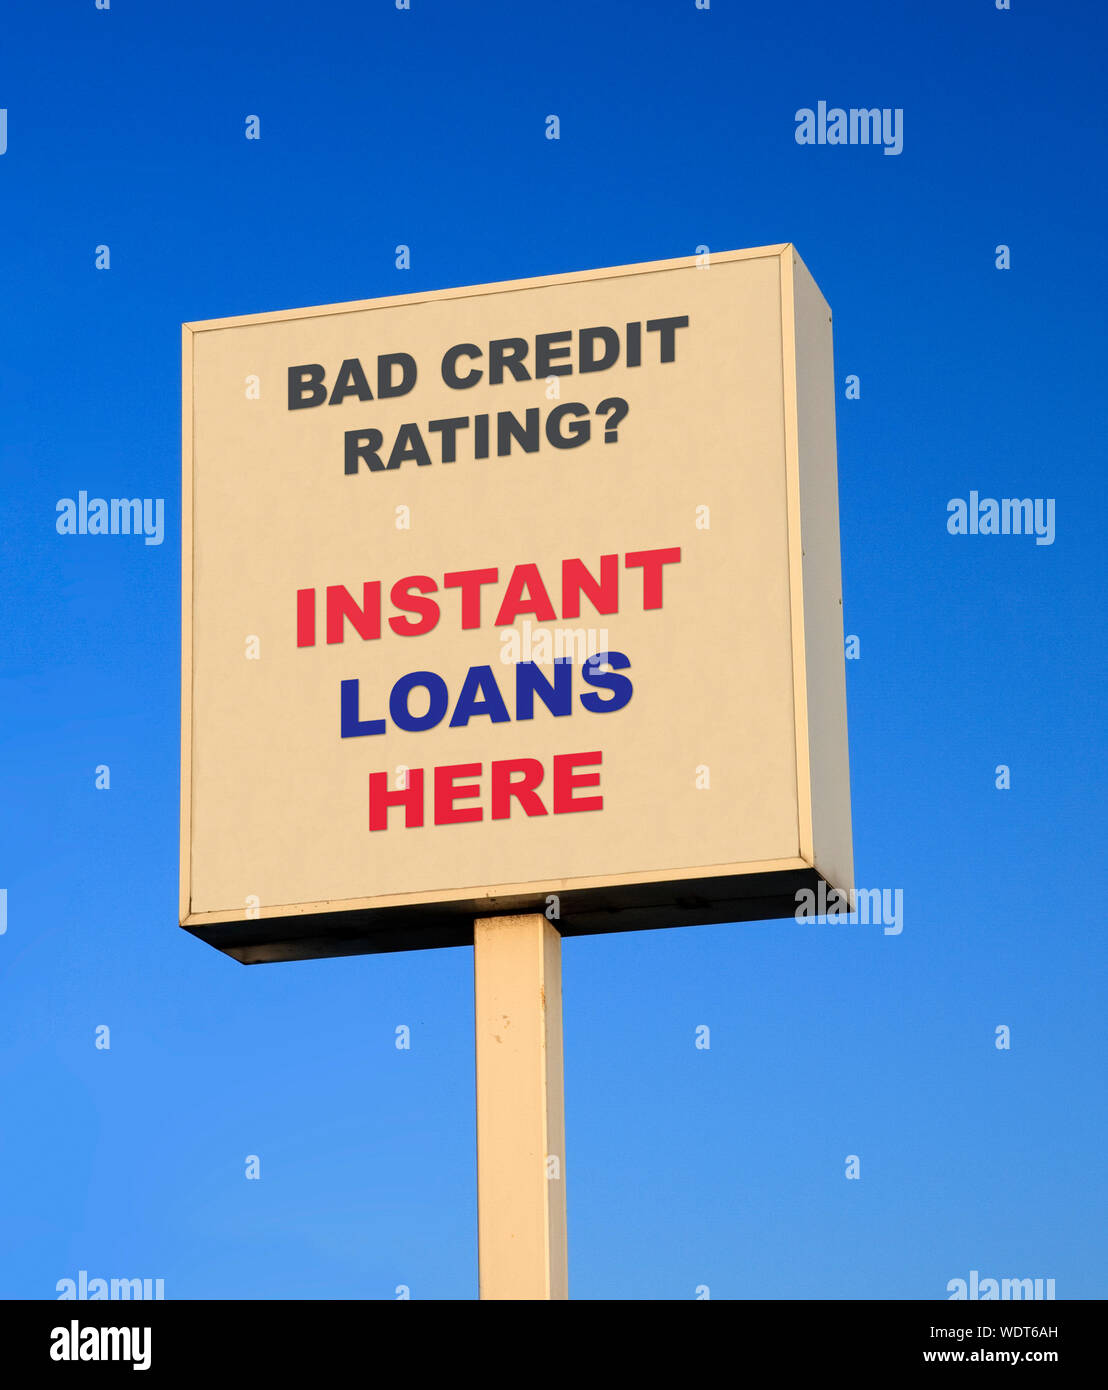 Large outdoor sign advertising instant loans for people with bad credit rating Stock Photo